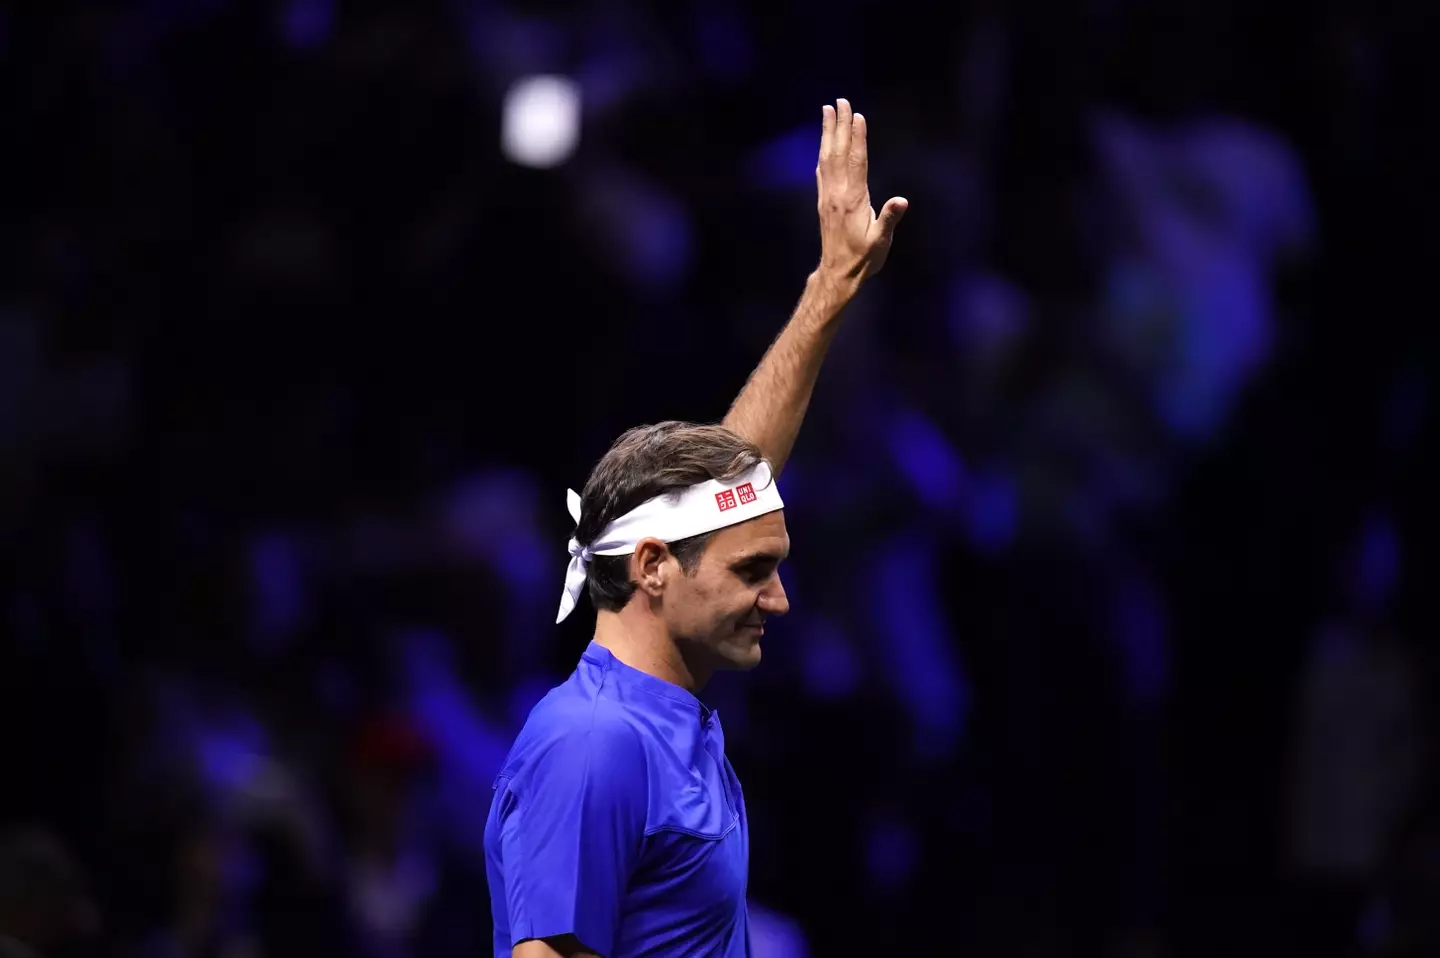 Federer retired from professional tennis.